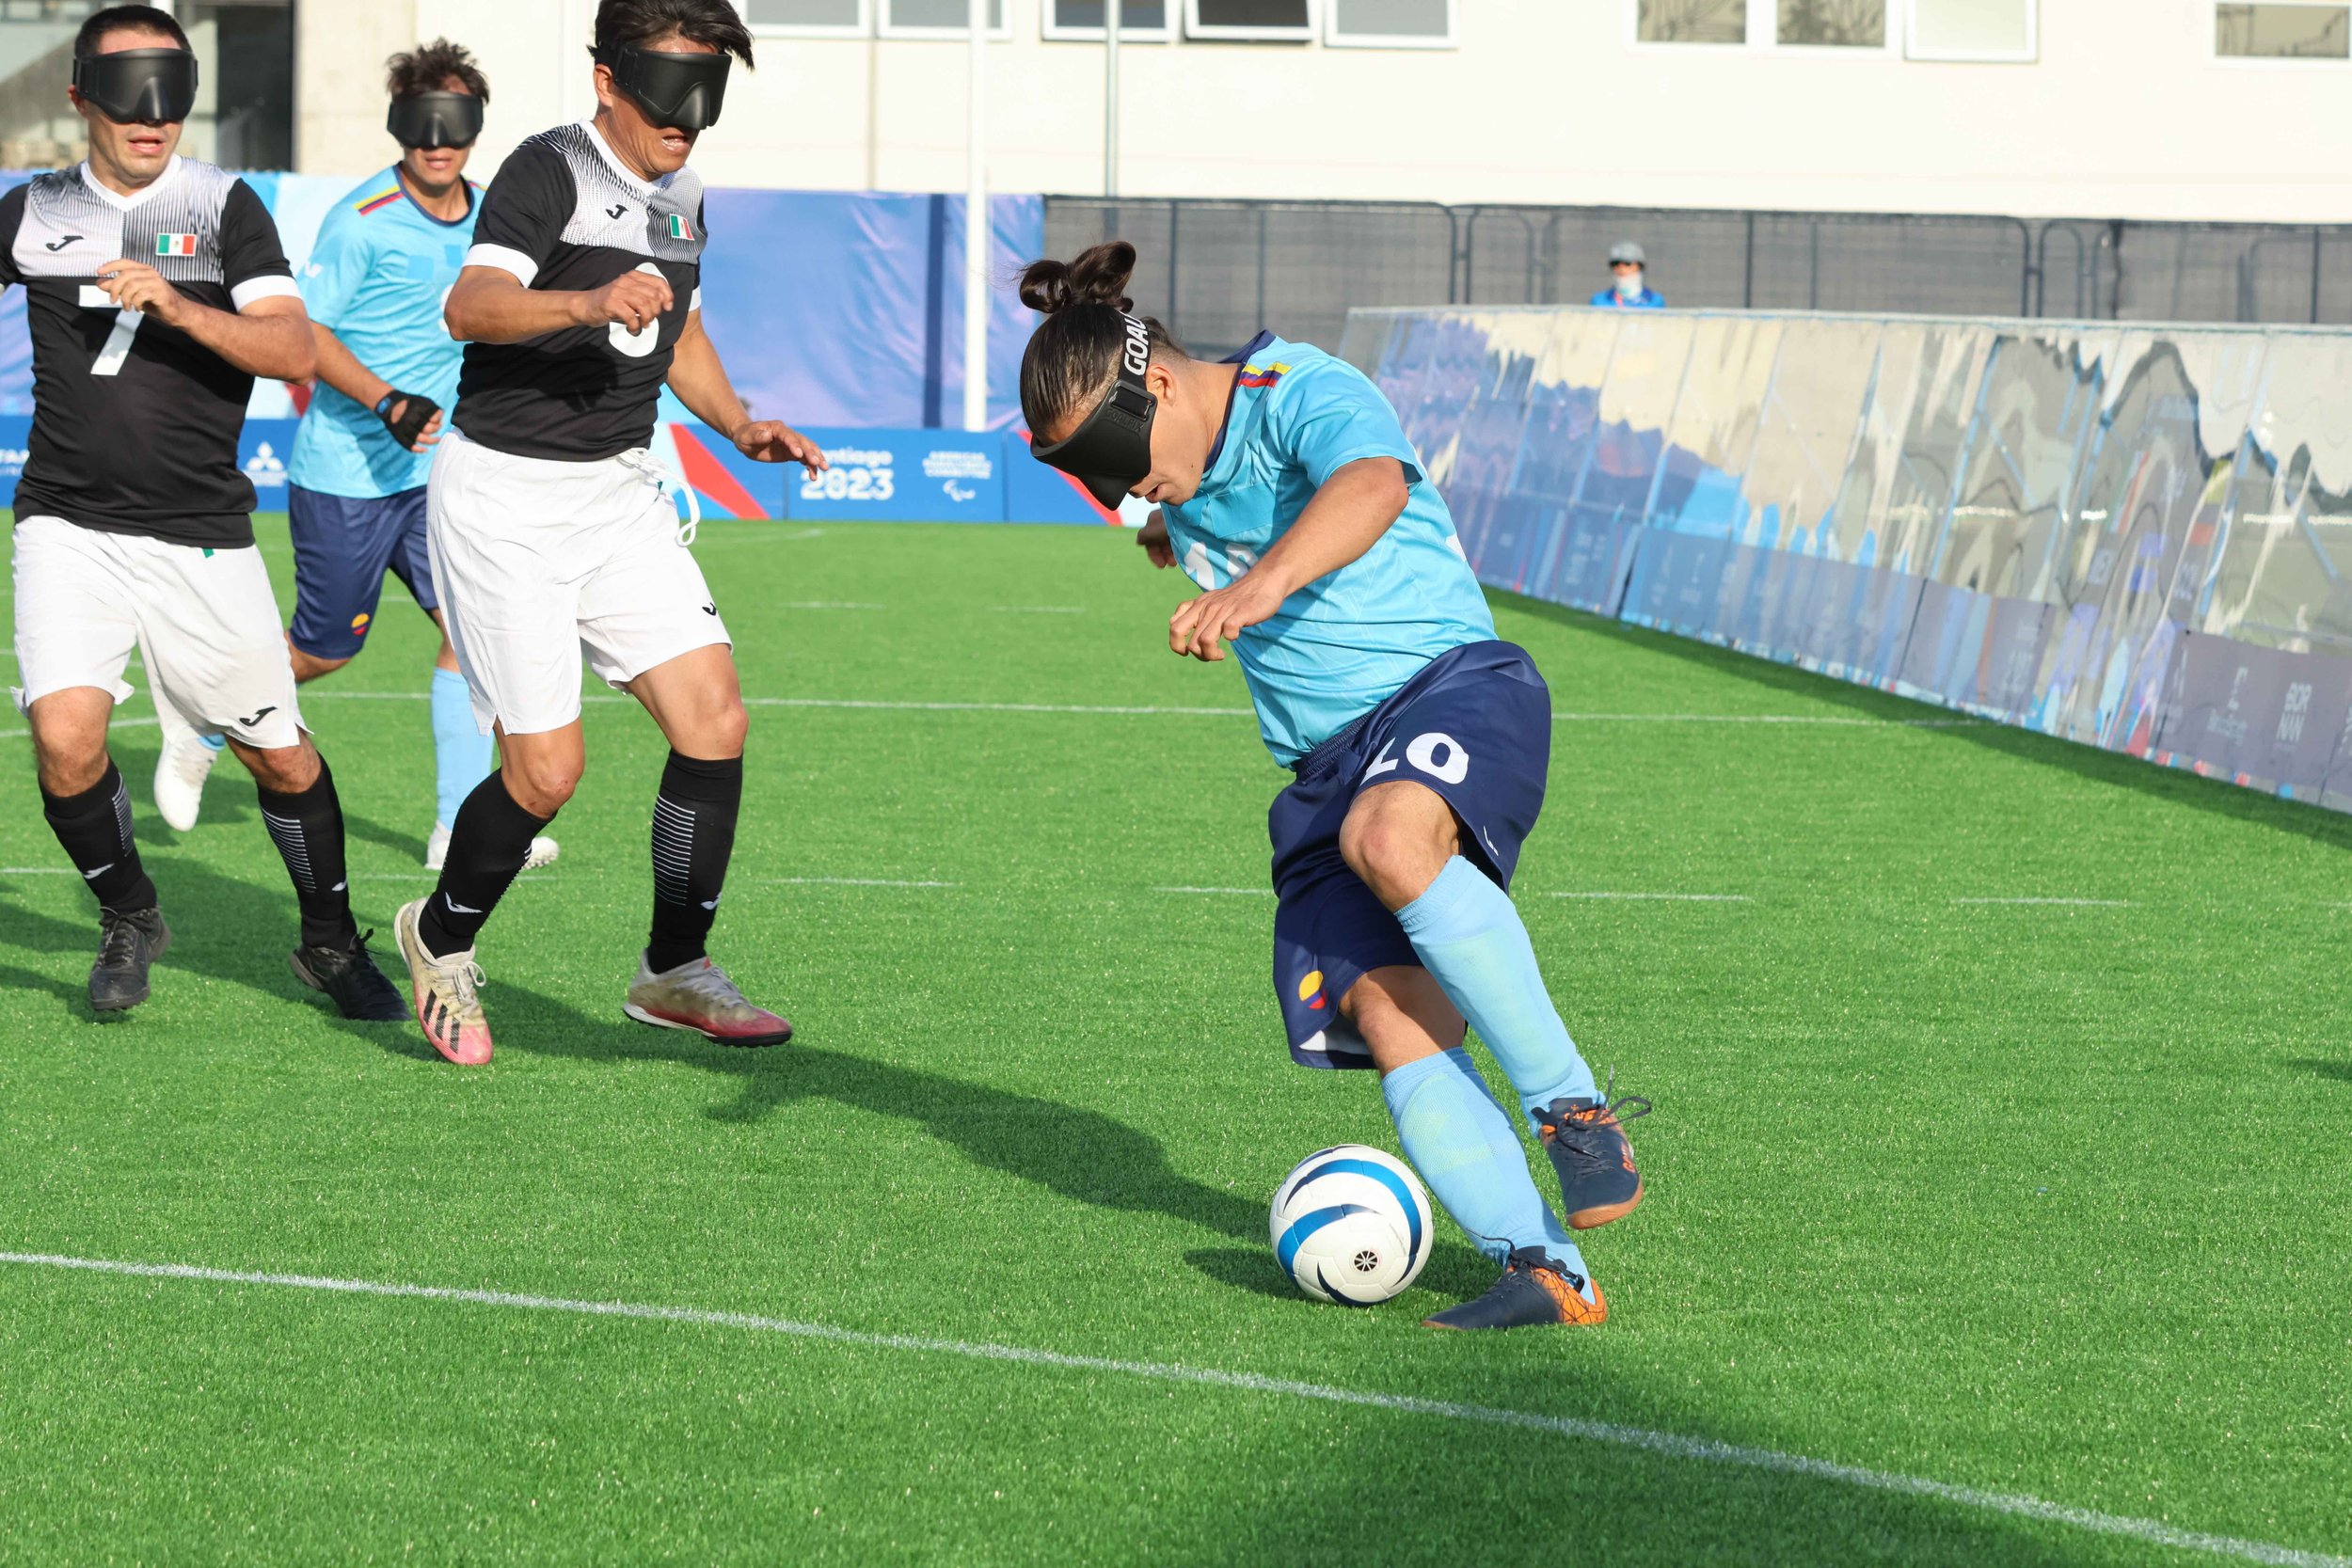 A blind soccer player dribbles a soccer ball down the field while opposing players approach from the side.